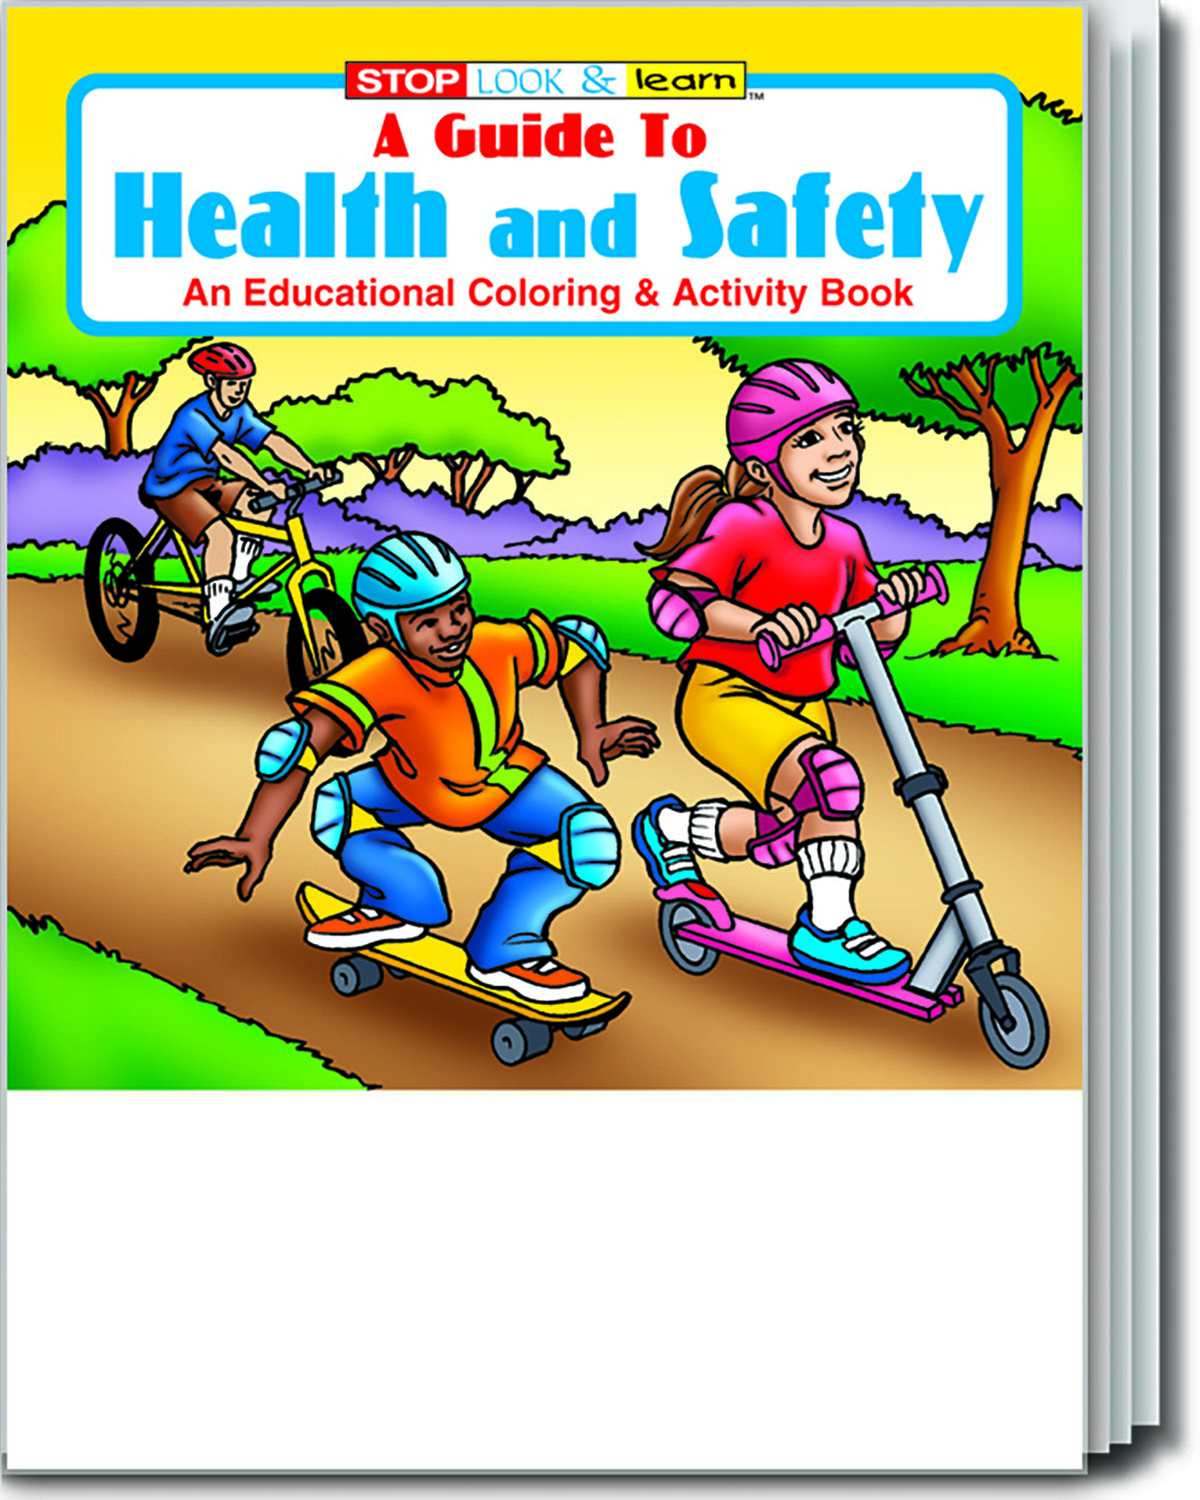 Wholesale Coloring Book - A Guide to Health and Safety (SKU 2345951